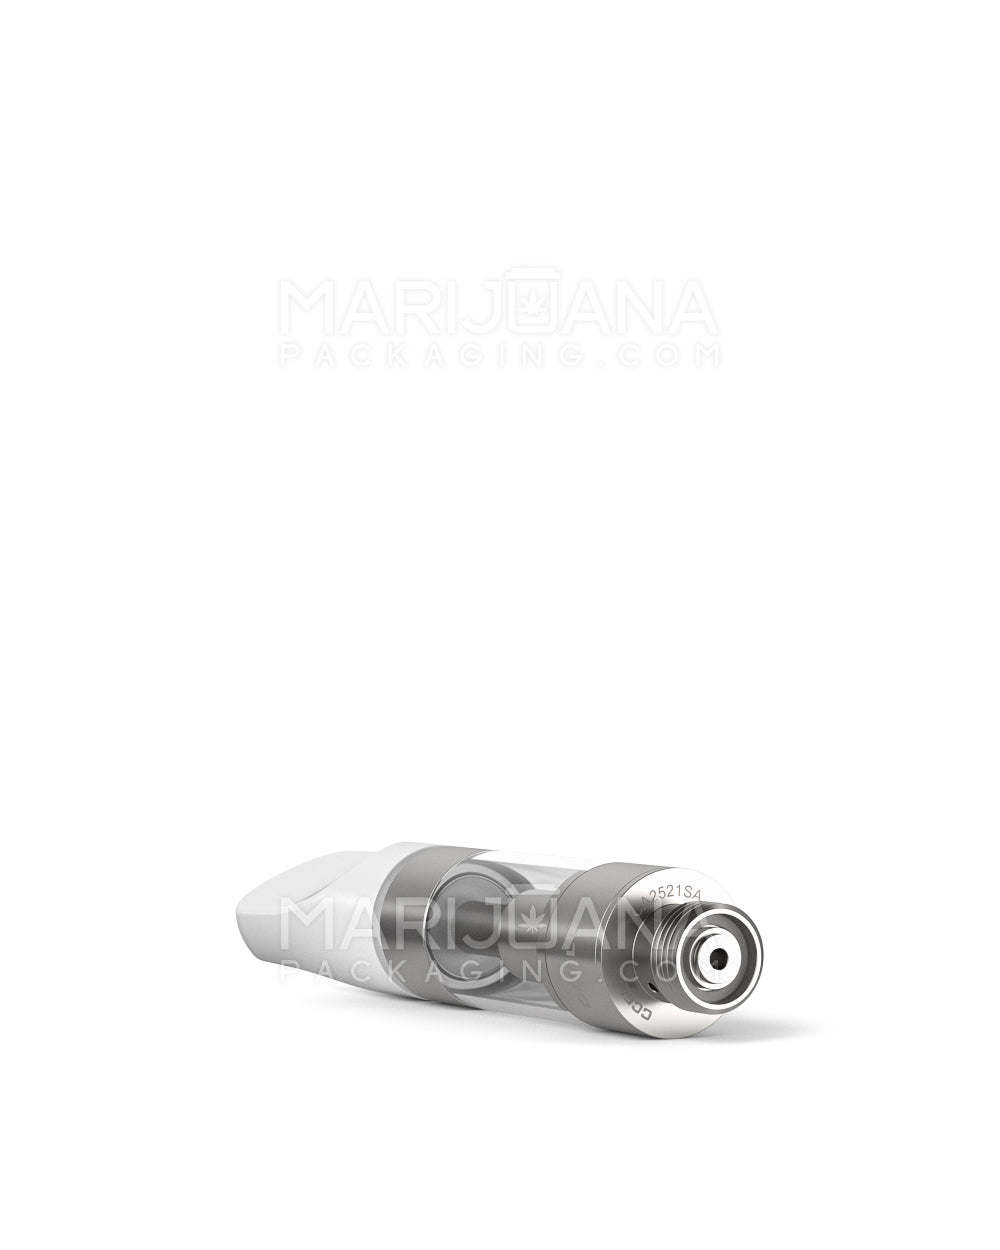 CCELL | Plastic Vape Cartridge with White Plastic Mouthpiece | 0.5mL - Press On - 100 Count - 7